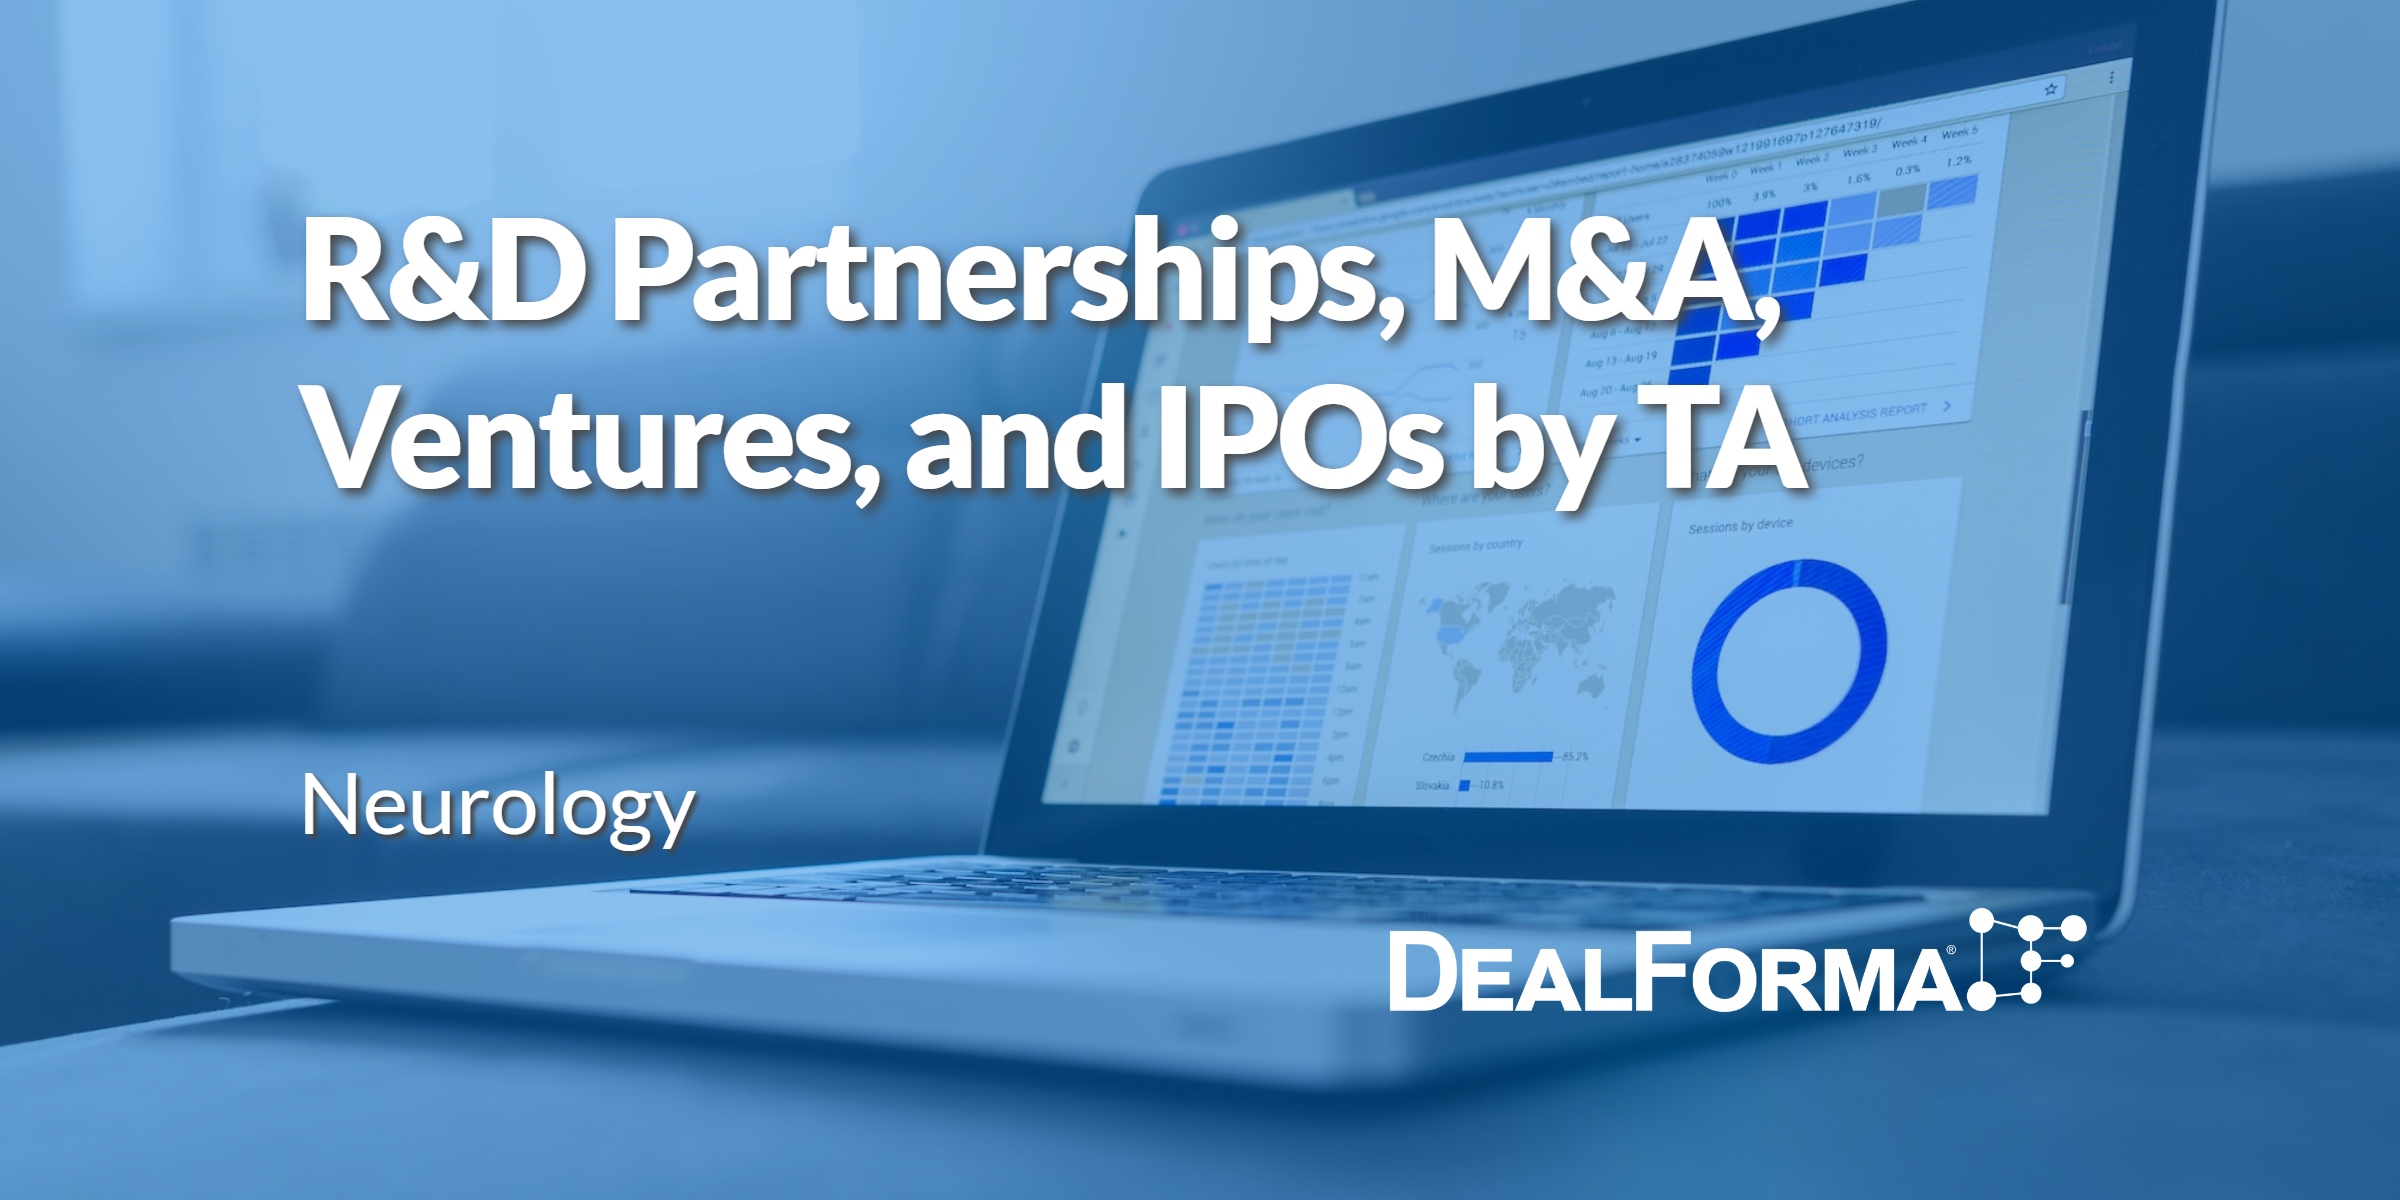 R&D Partnerships, M&A, Ventures, and IPOs by TA